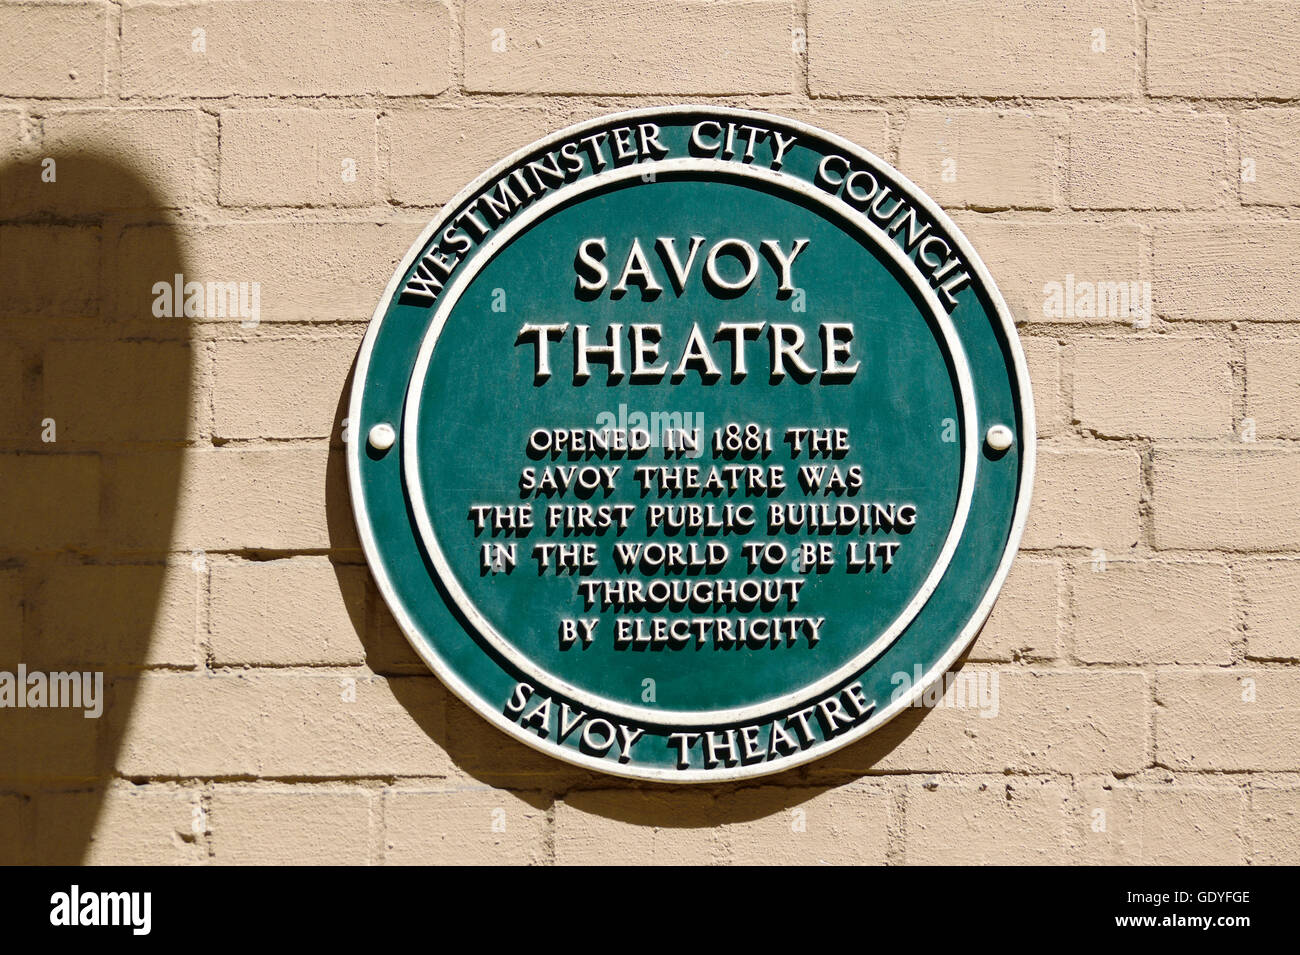 London, England, UK. Commemorative plaque: Savoy Theatre - first public building in the world to be lit by electricity (1881) Stock Photo